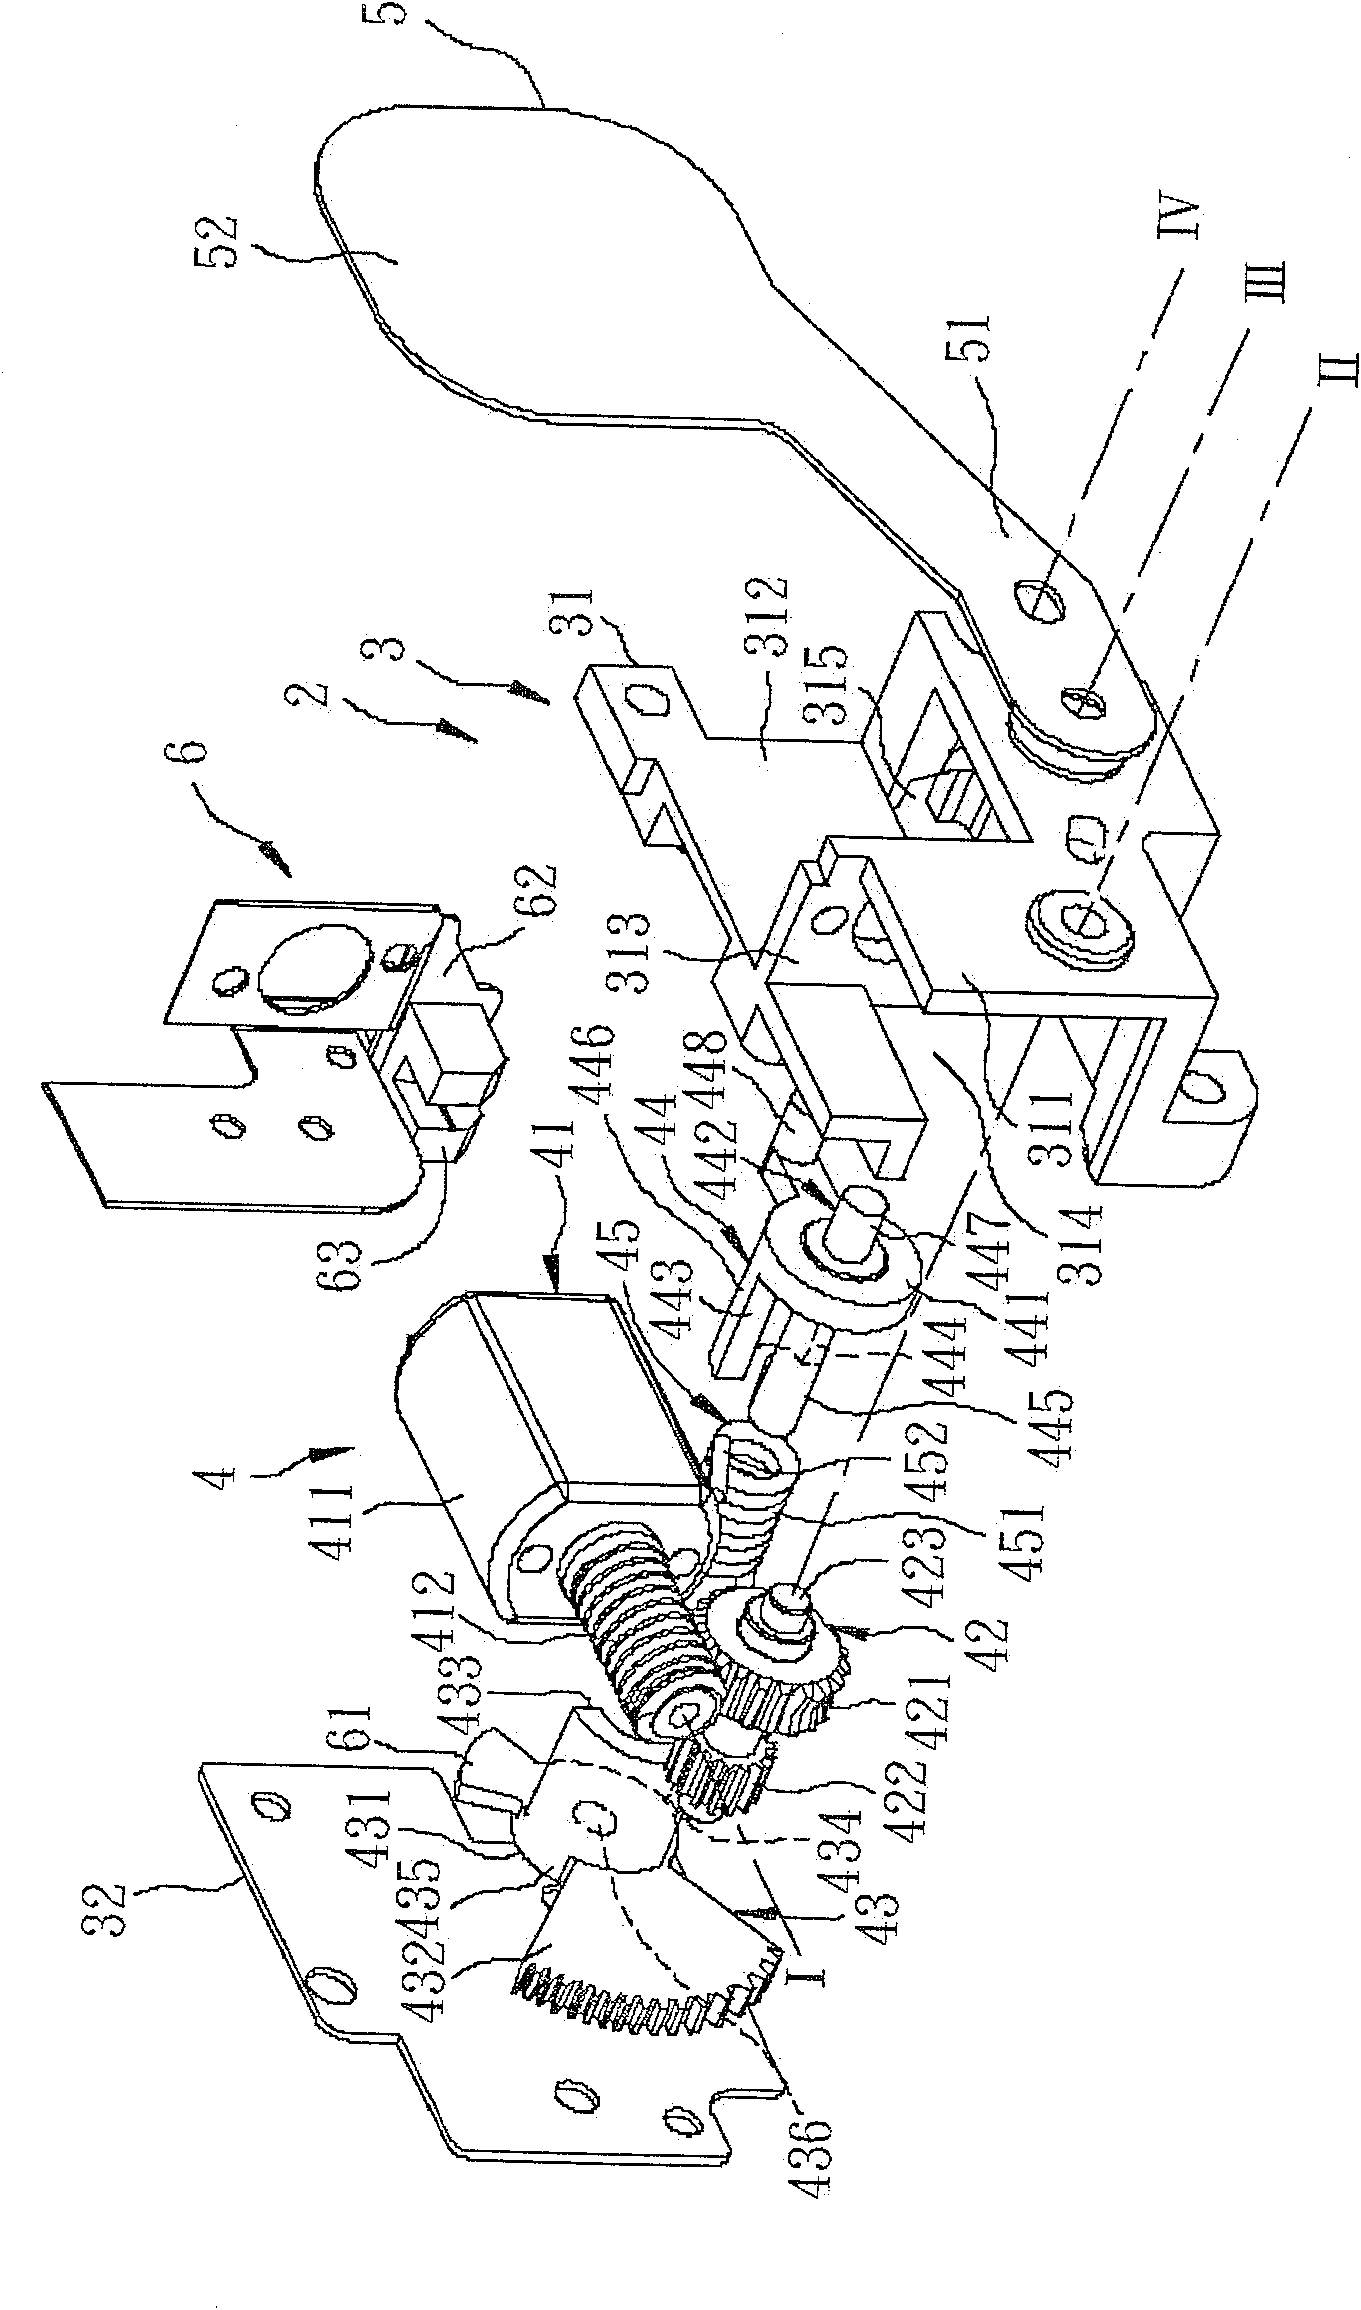 Electric dust-proof device